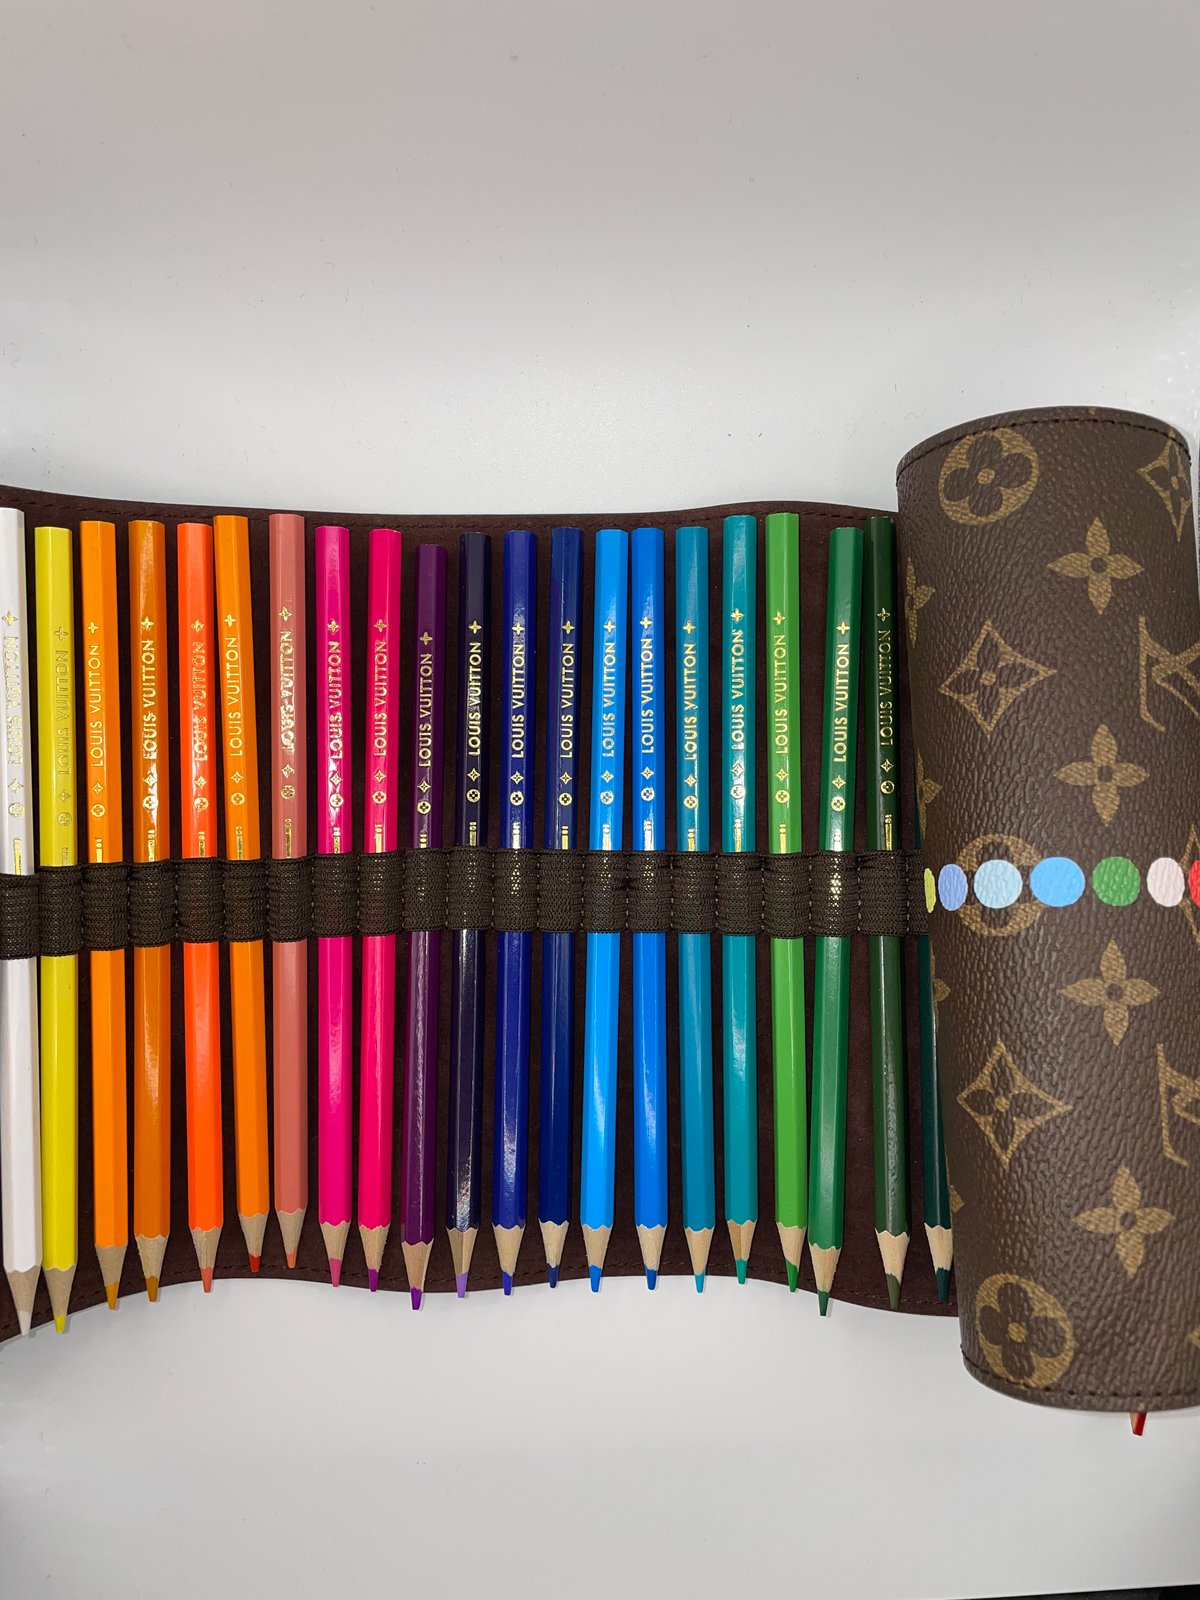 Louis Vuitton, Bentley and Cartier create stunning products in rainbow  colours to spread hope - Luxebook